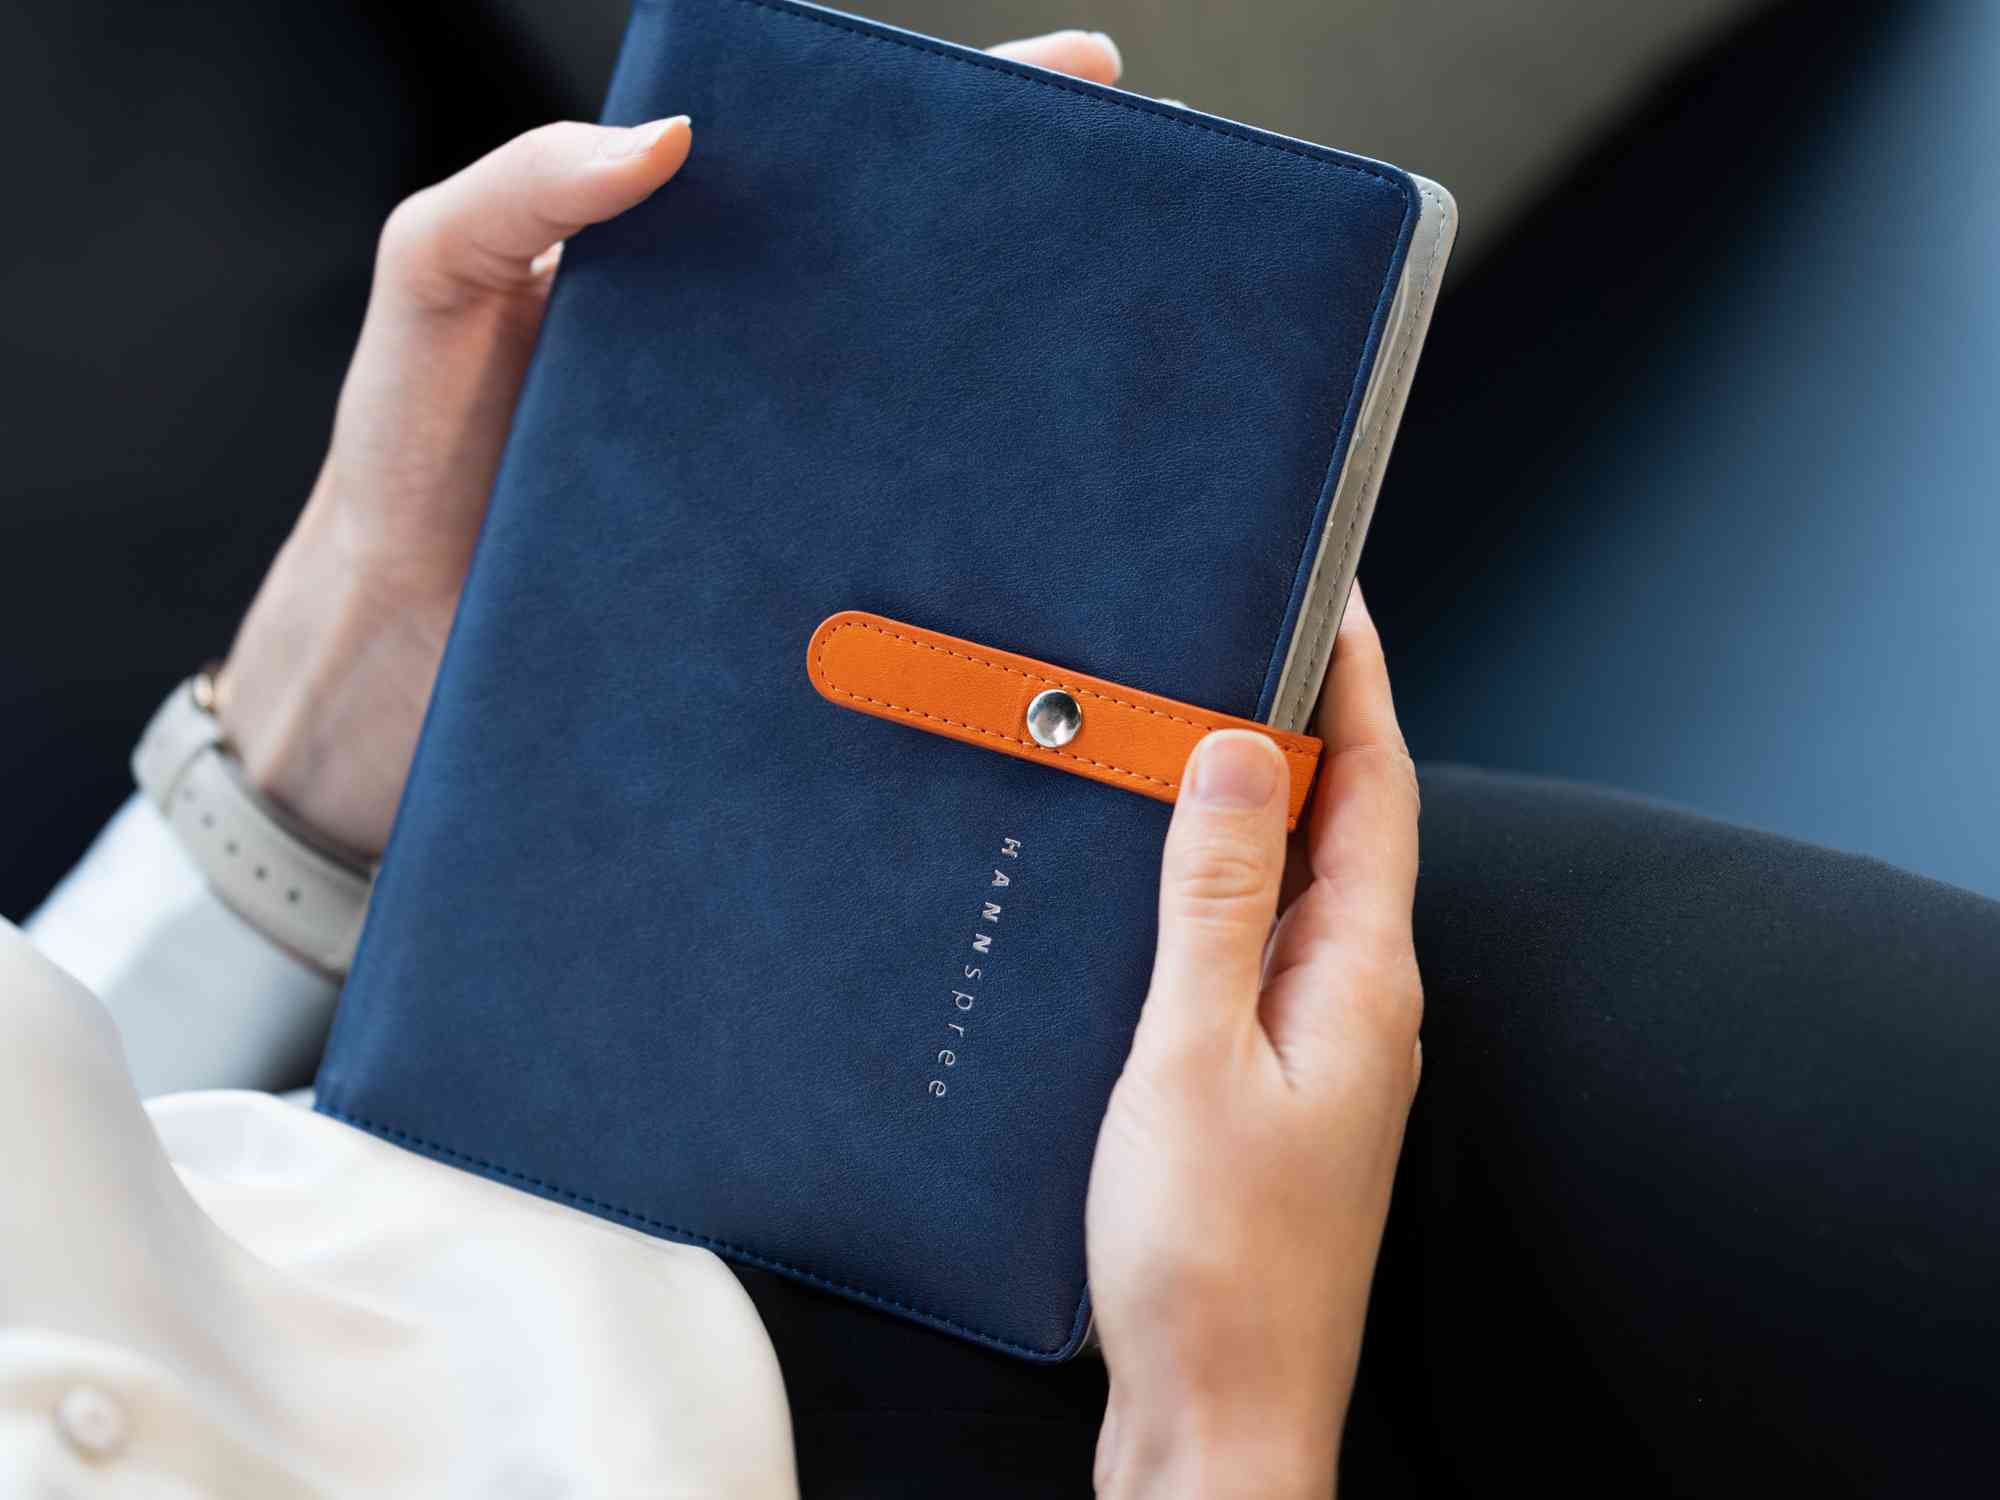 Capture creative ideas with Hannsnote smart notebook - Photo 2.